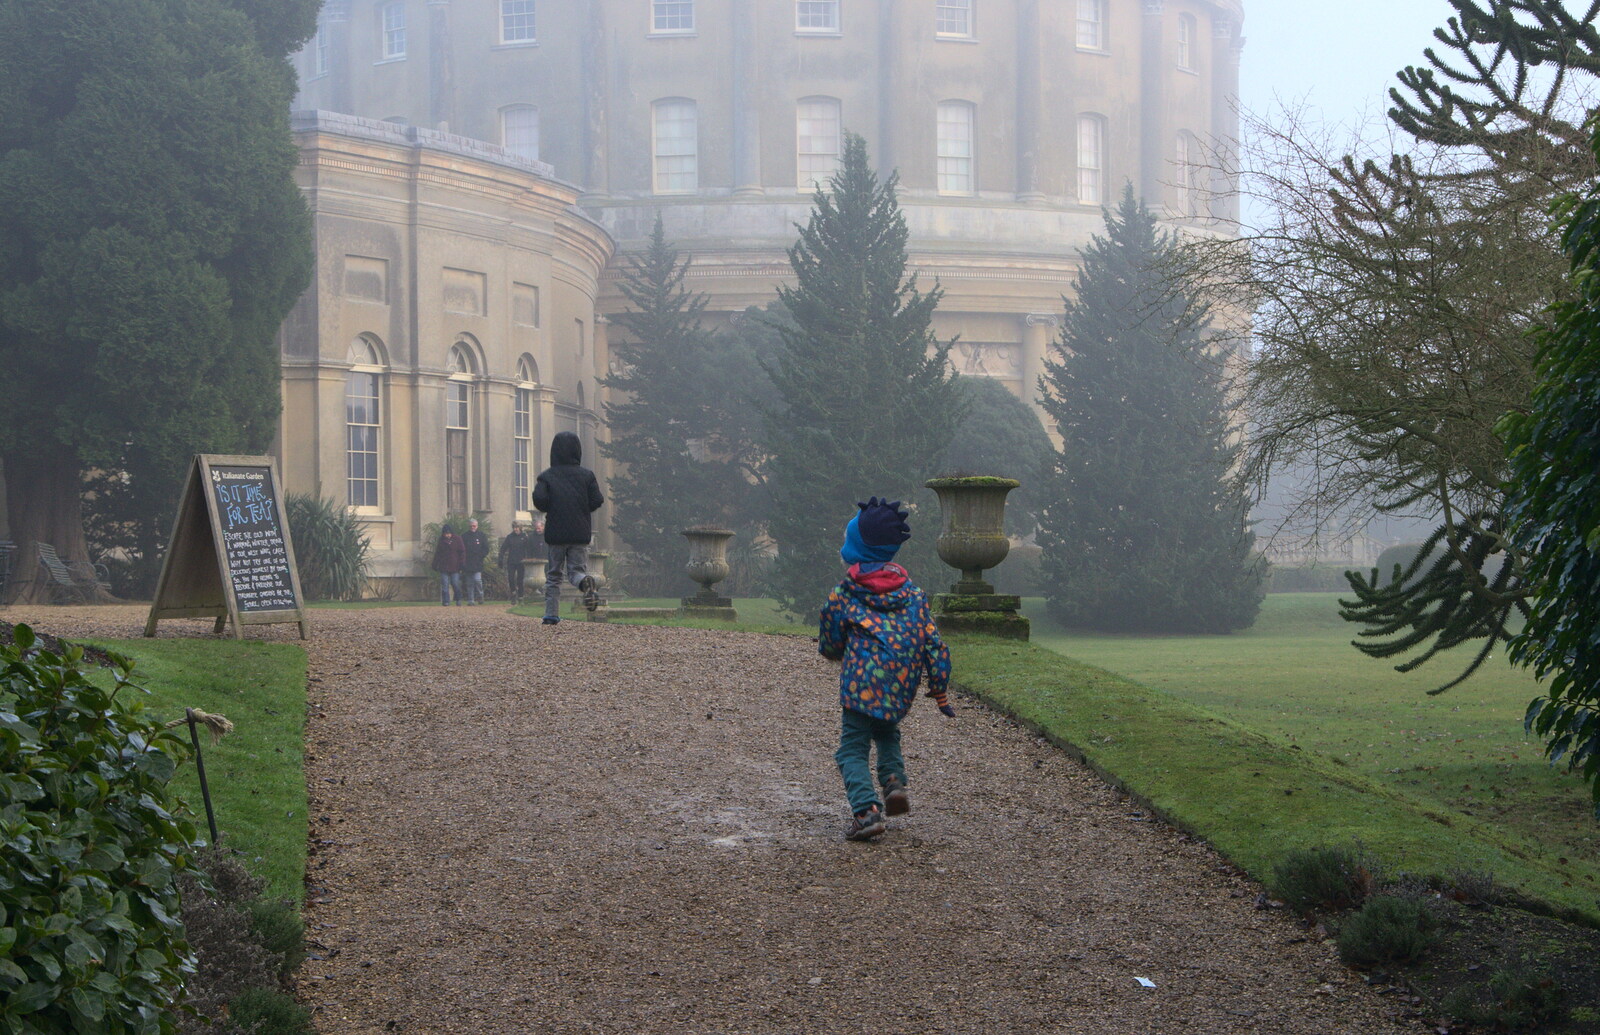 Fred and Harry run off from A Trip to Ickworth House, Horringer, Suffolk - 30th December 2016